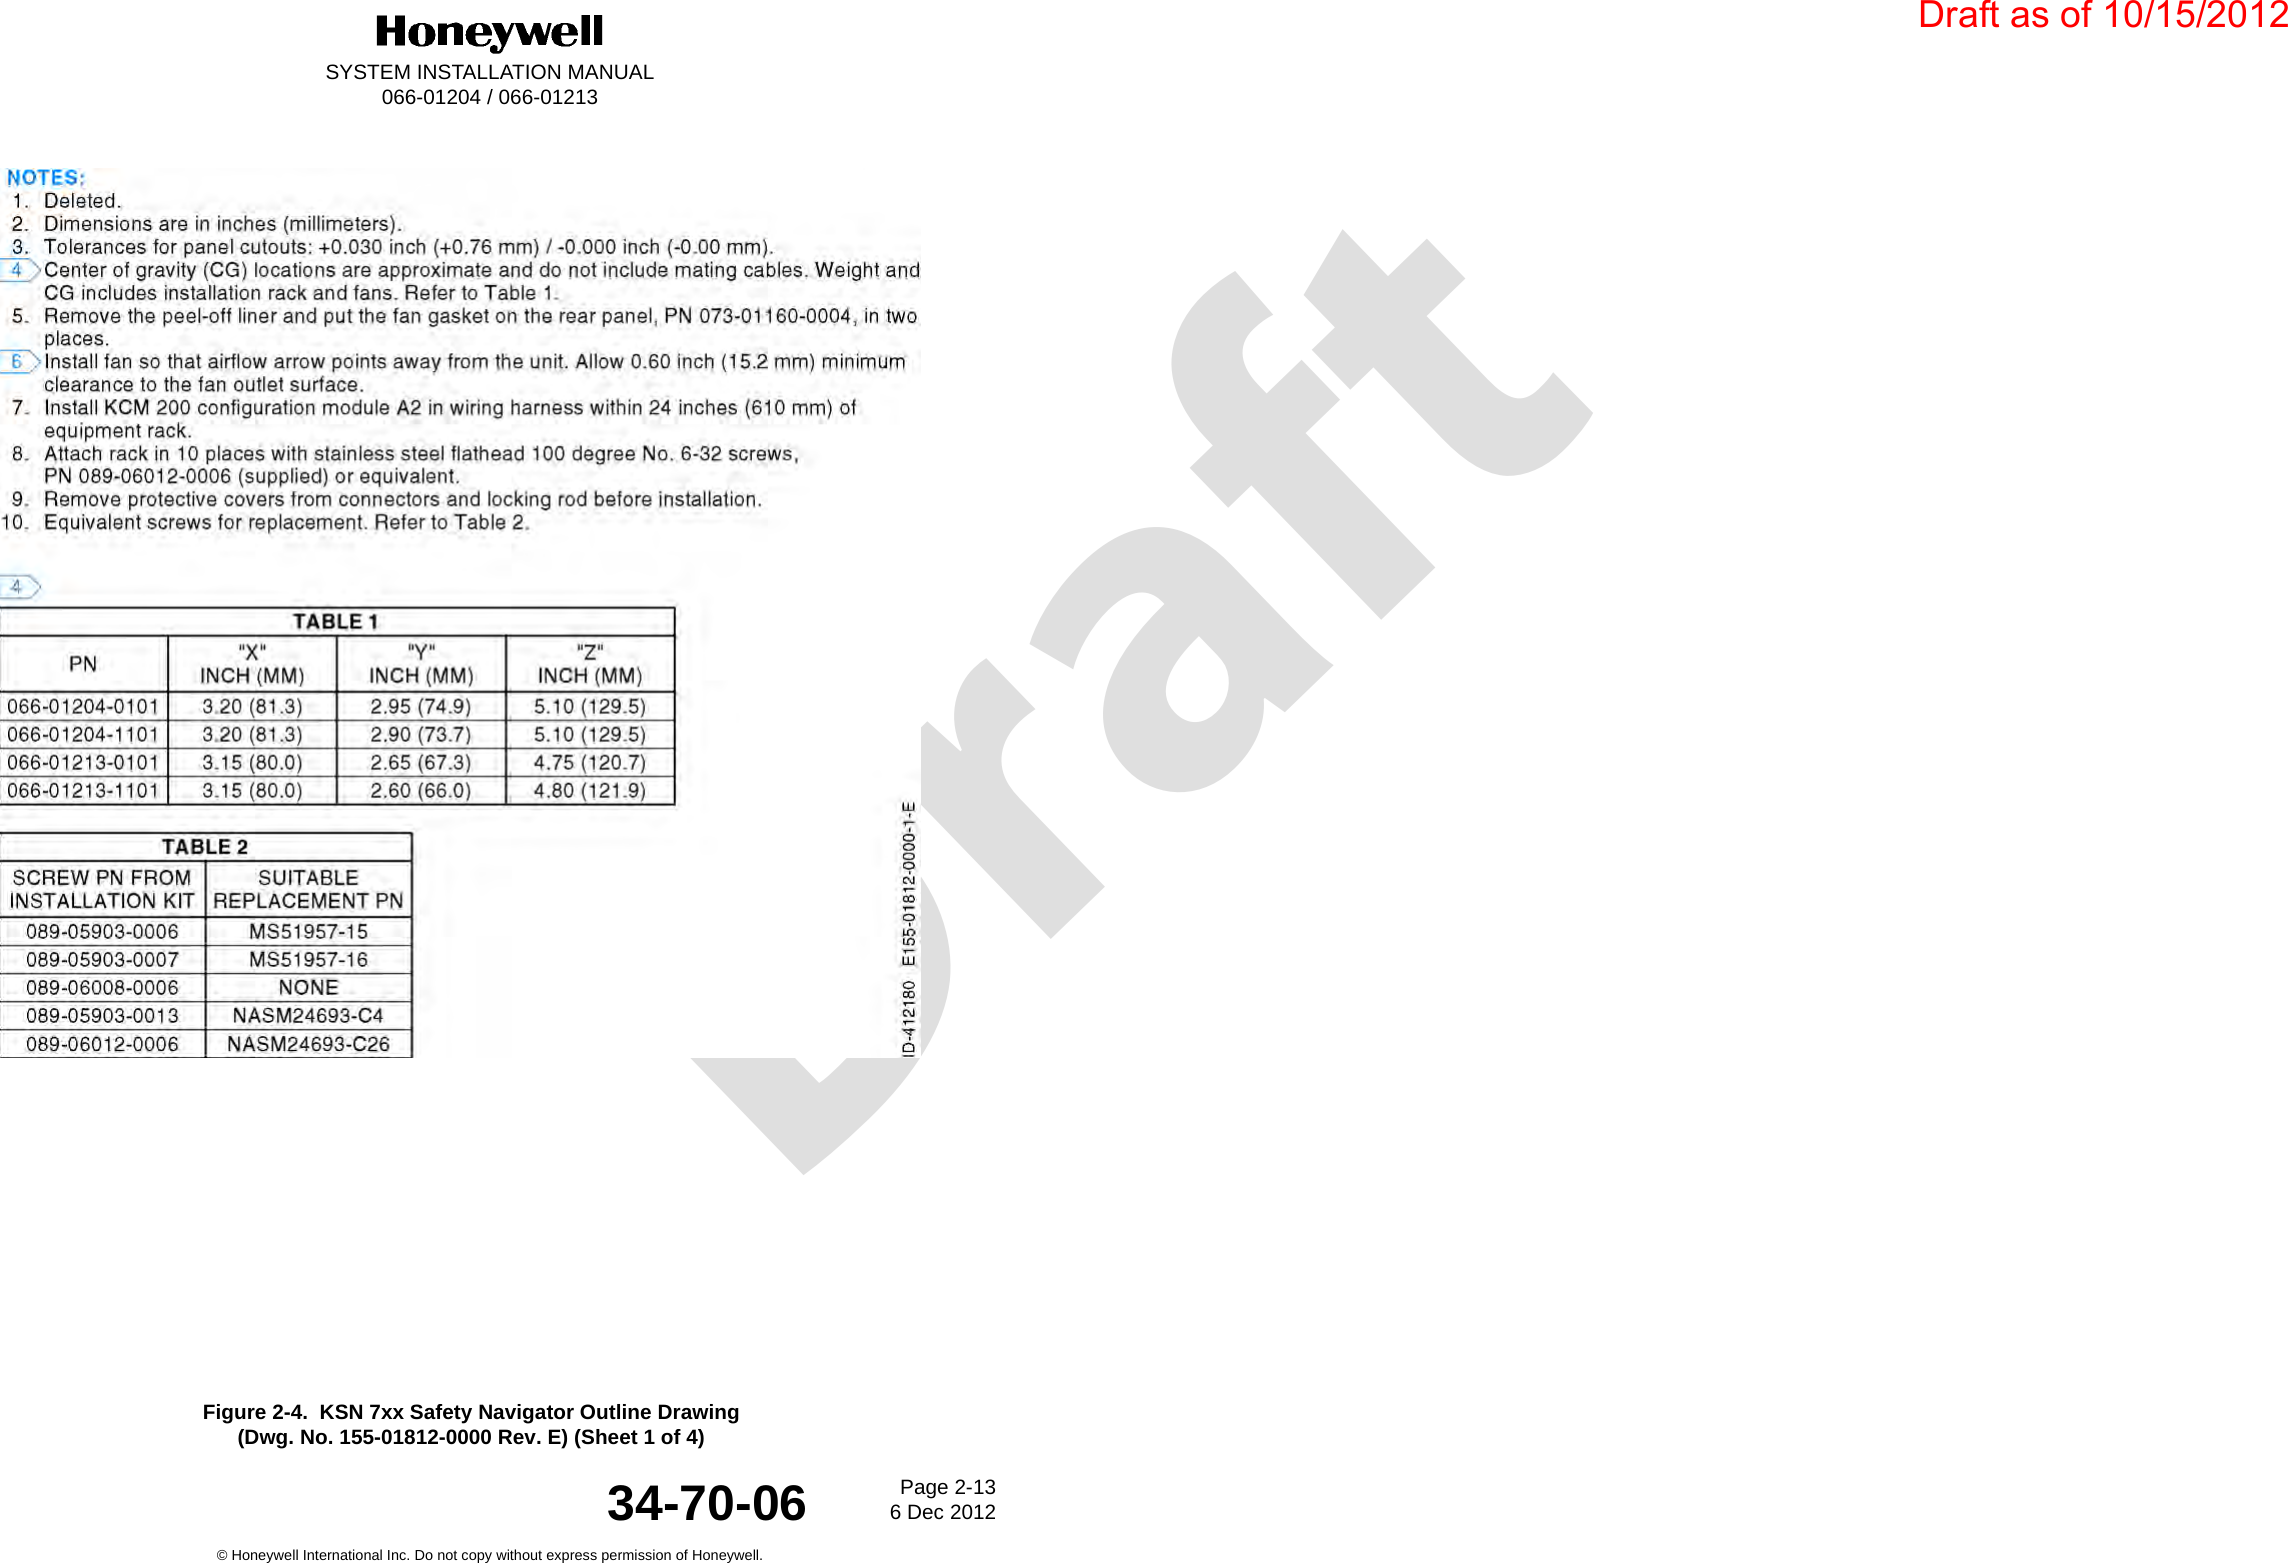 DraftSYSTEM INSTALLATION MANUAL066-01204 / 066-01213Page 2-136 Dec 2012© Honeywell International Inc. Do not copy without express permission of Honeywell.34-70-06Figure 2-4.  KSN 7xx Safety Navigator Outline Drawing(Dwg. No. 155-01812-0000 Rev. E) (Sheet 1 of 4)Draft as of 10/15/2012